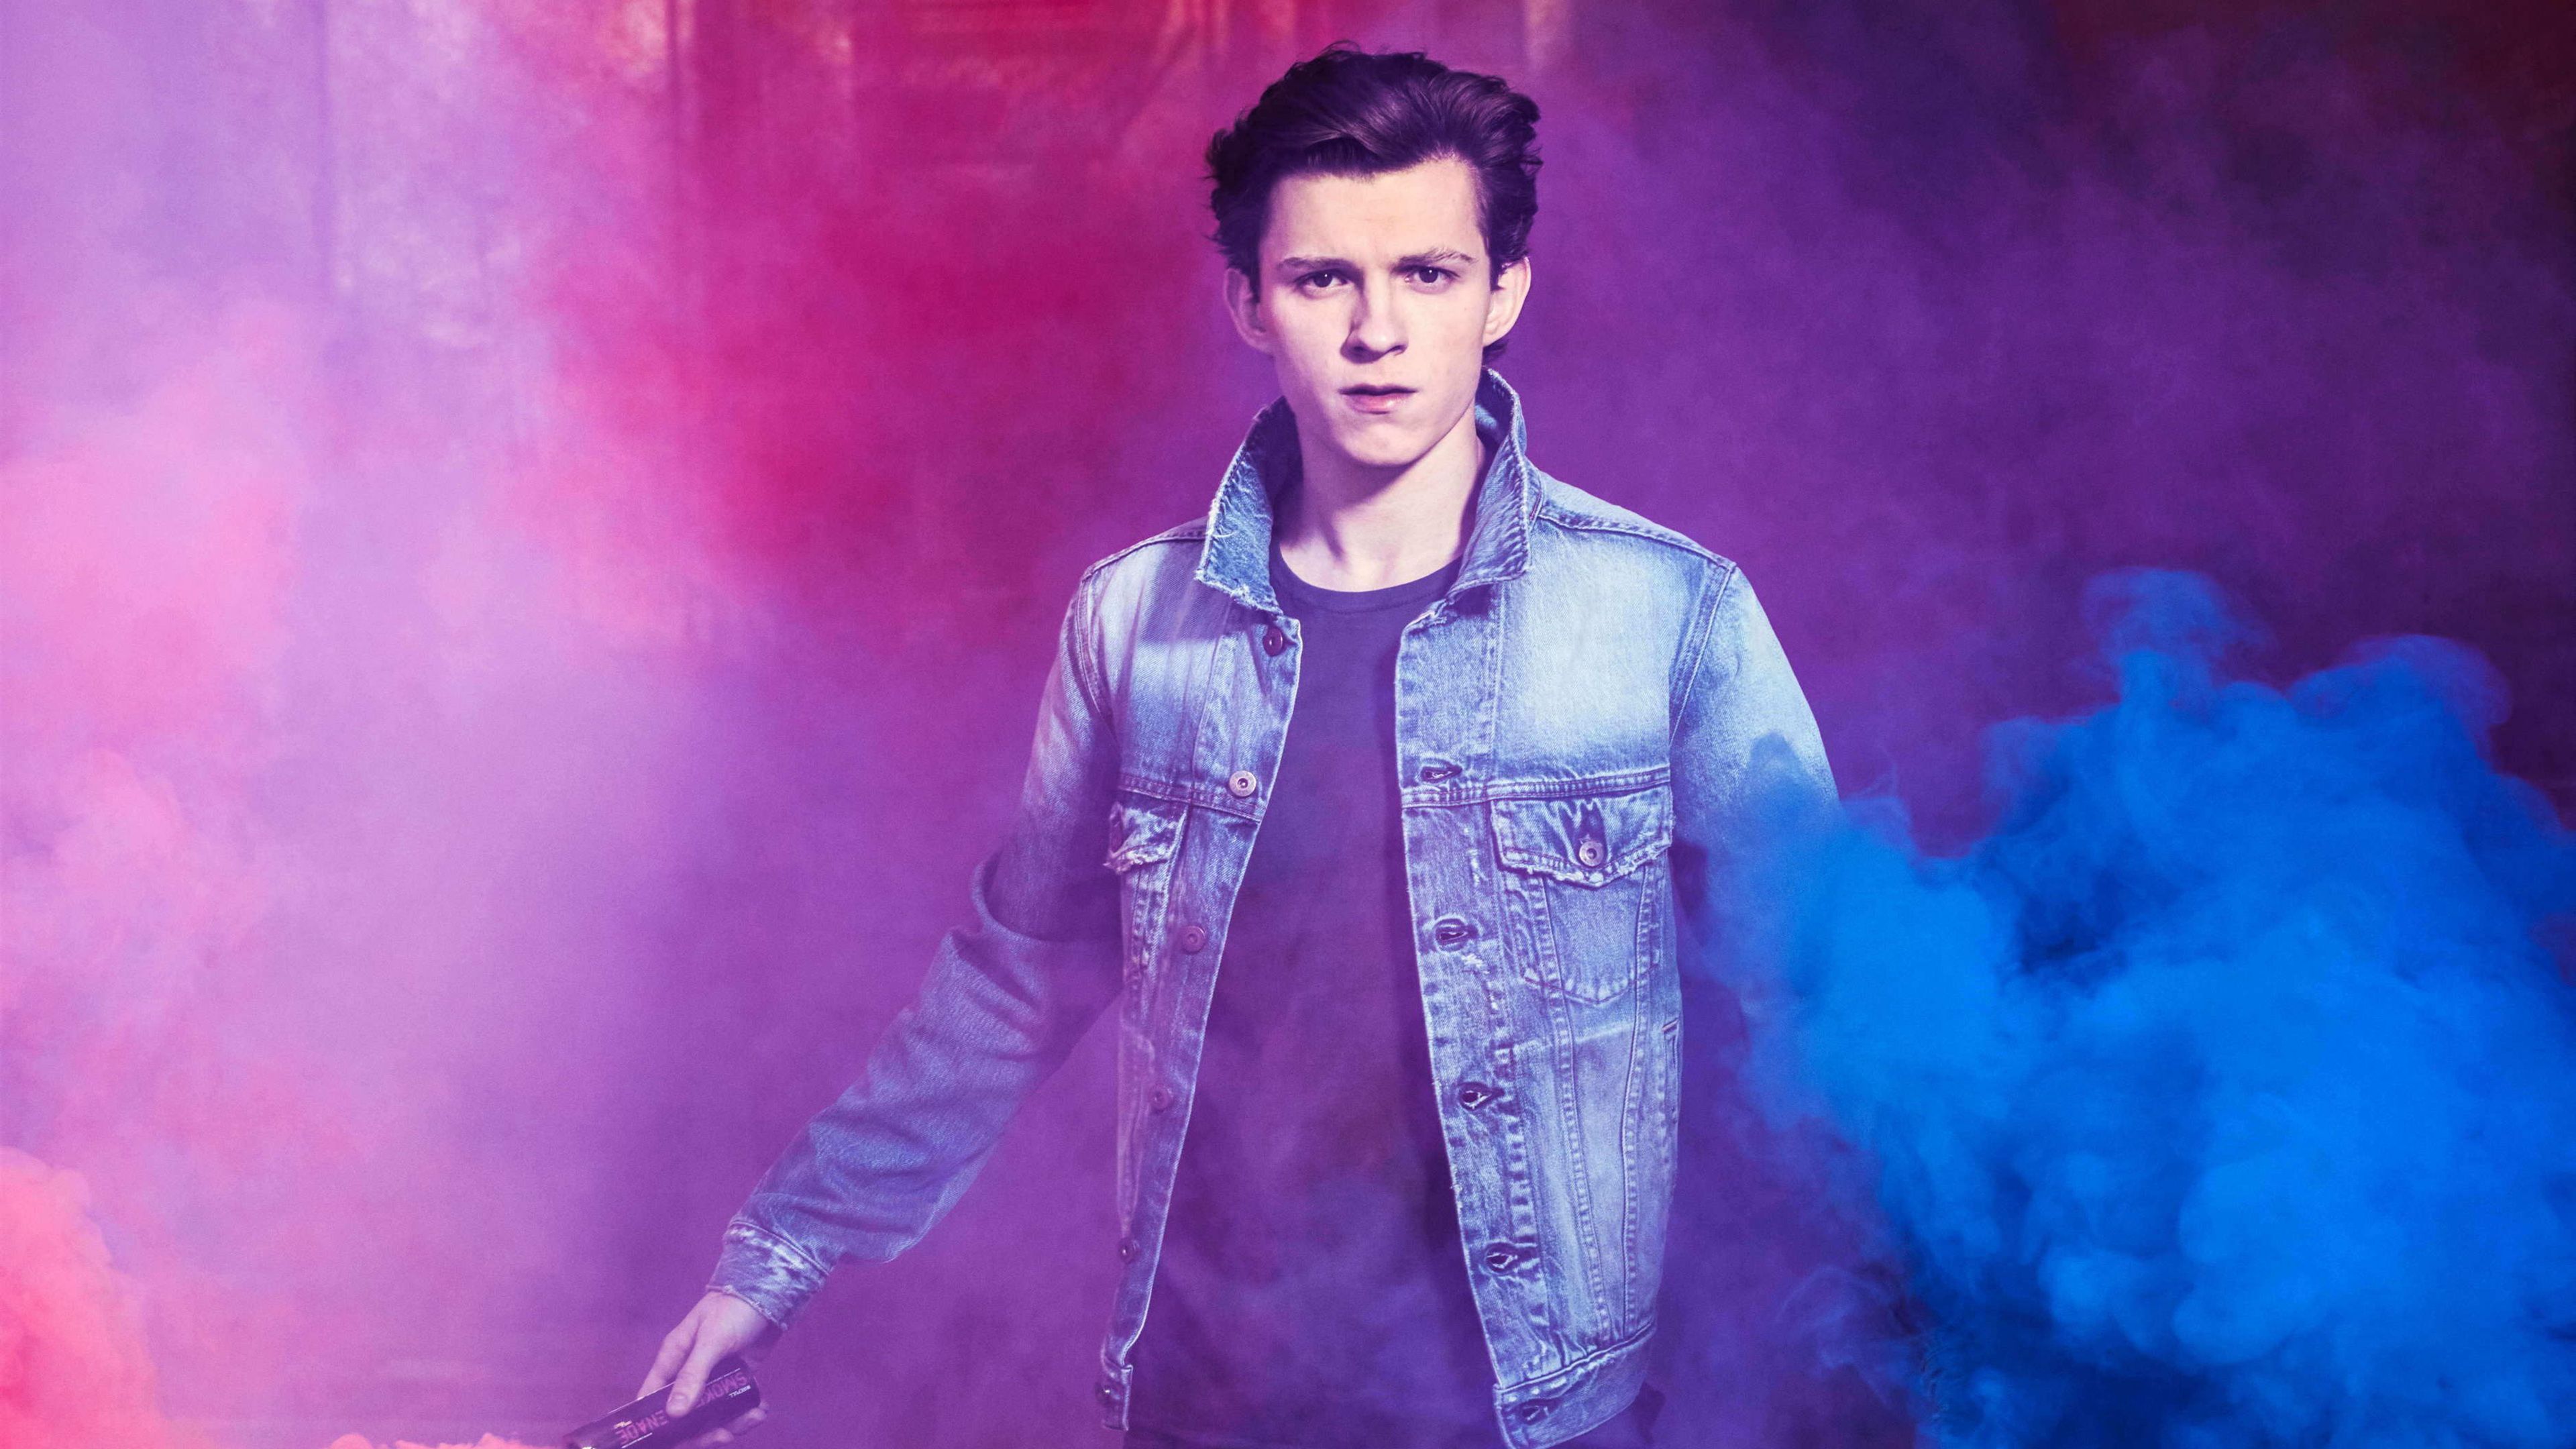 A young man in blue jeans and jacket standing on top of purple smoke - Tom Holland